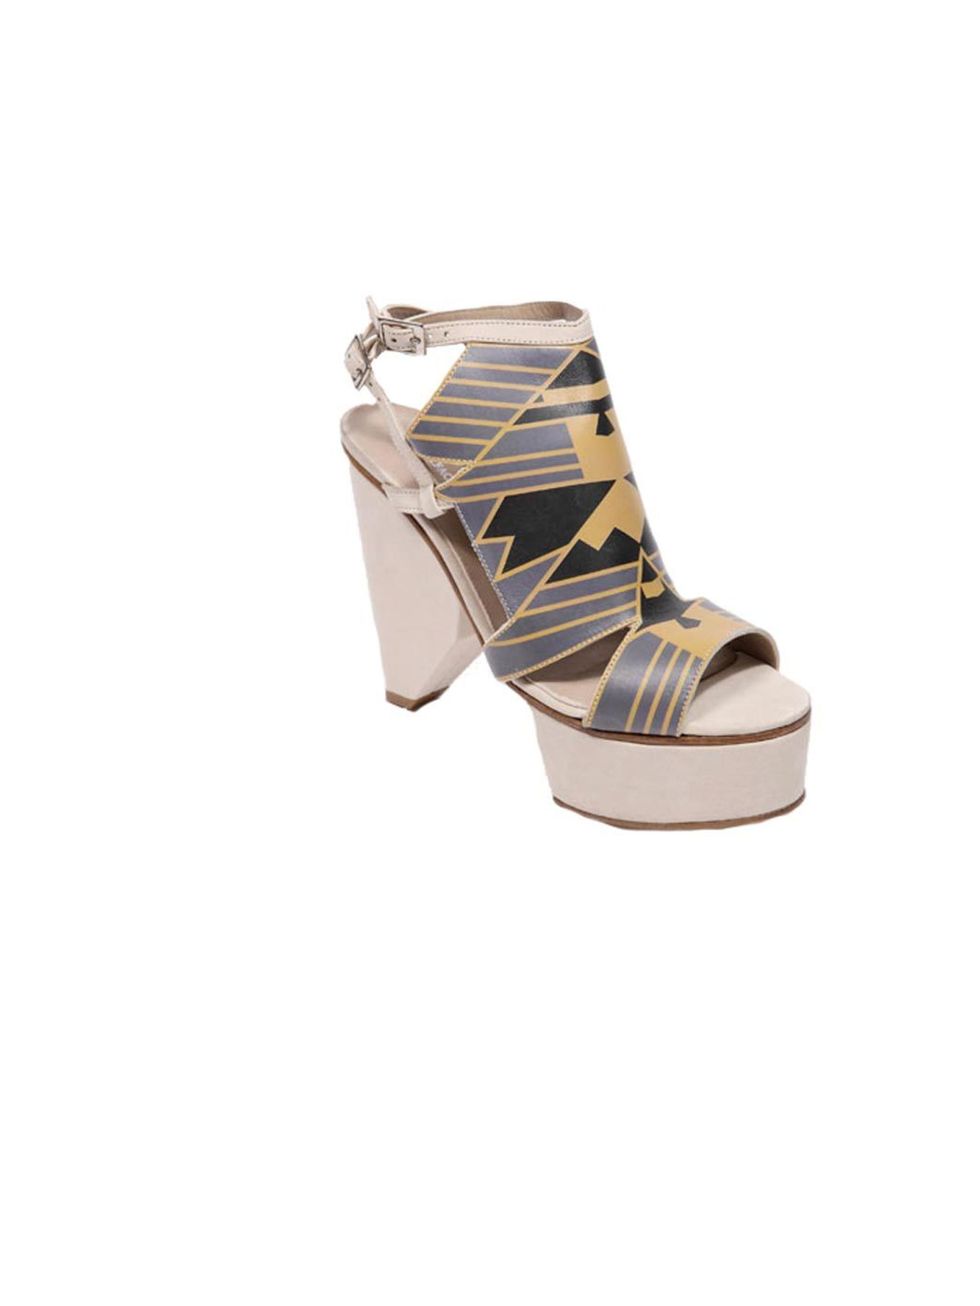 <p>Surface to Air 'Art-Deco' platform sandals, £320, at <a href="http://www.urbanoutfitters.co.uk/surface-to-air-natural-art-deco-platform-shoes/invt/5316417568825/&amp;bklis">Urban Outfitters</a></p>